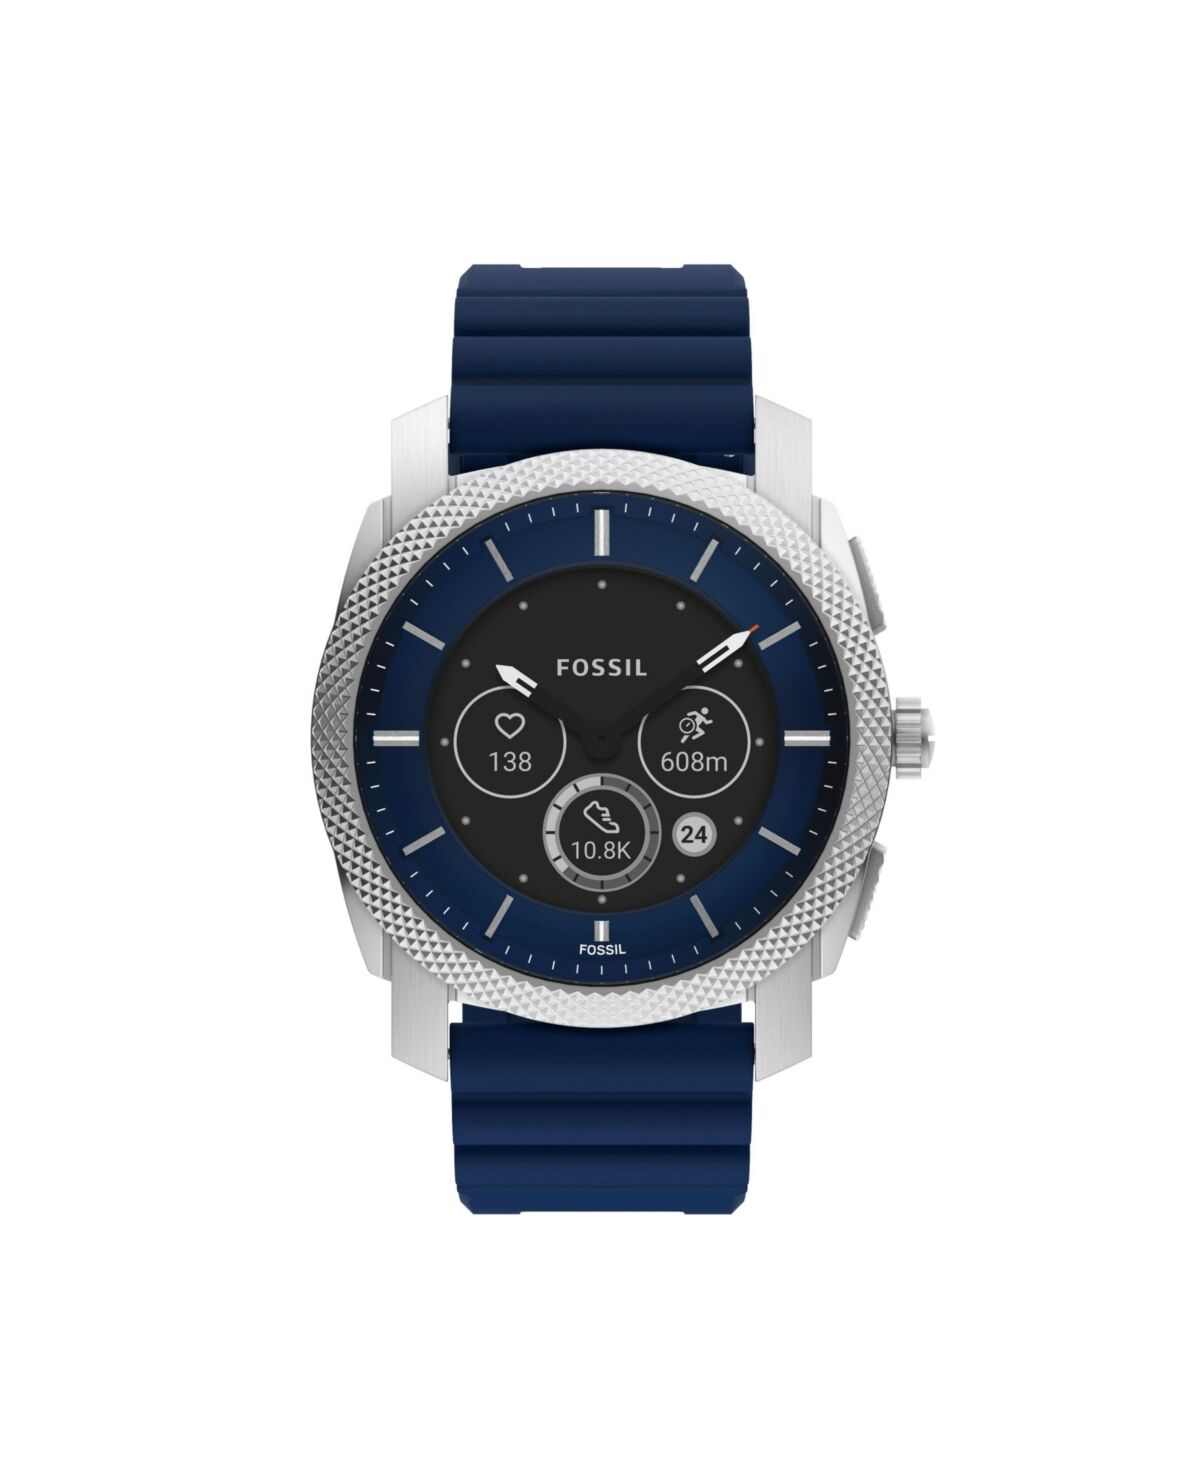 Fossil Men's Machine Gen 6 Hybrid Smart watch, Stainless Steel with Navy Silicone Band - Blue